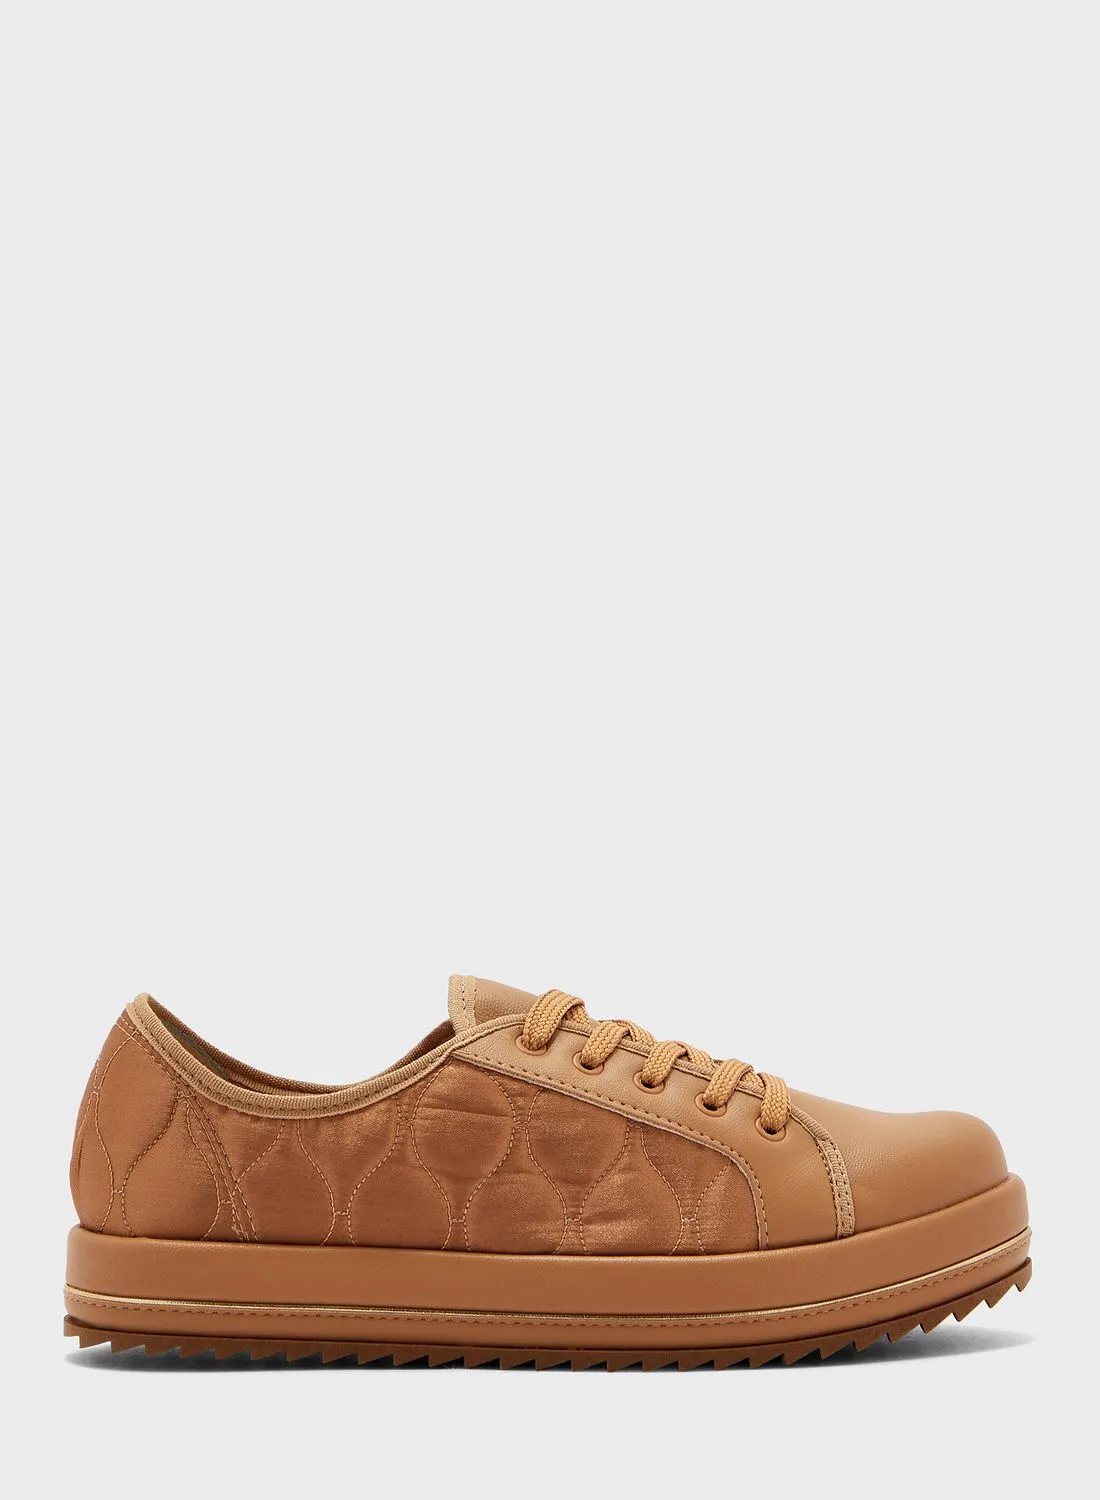 Beira Rio Lace Up Low Top Sneakers